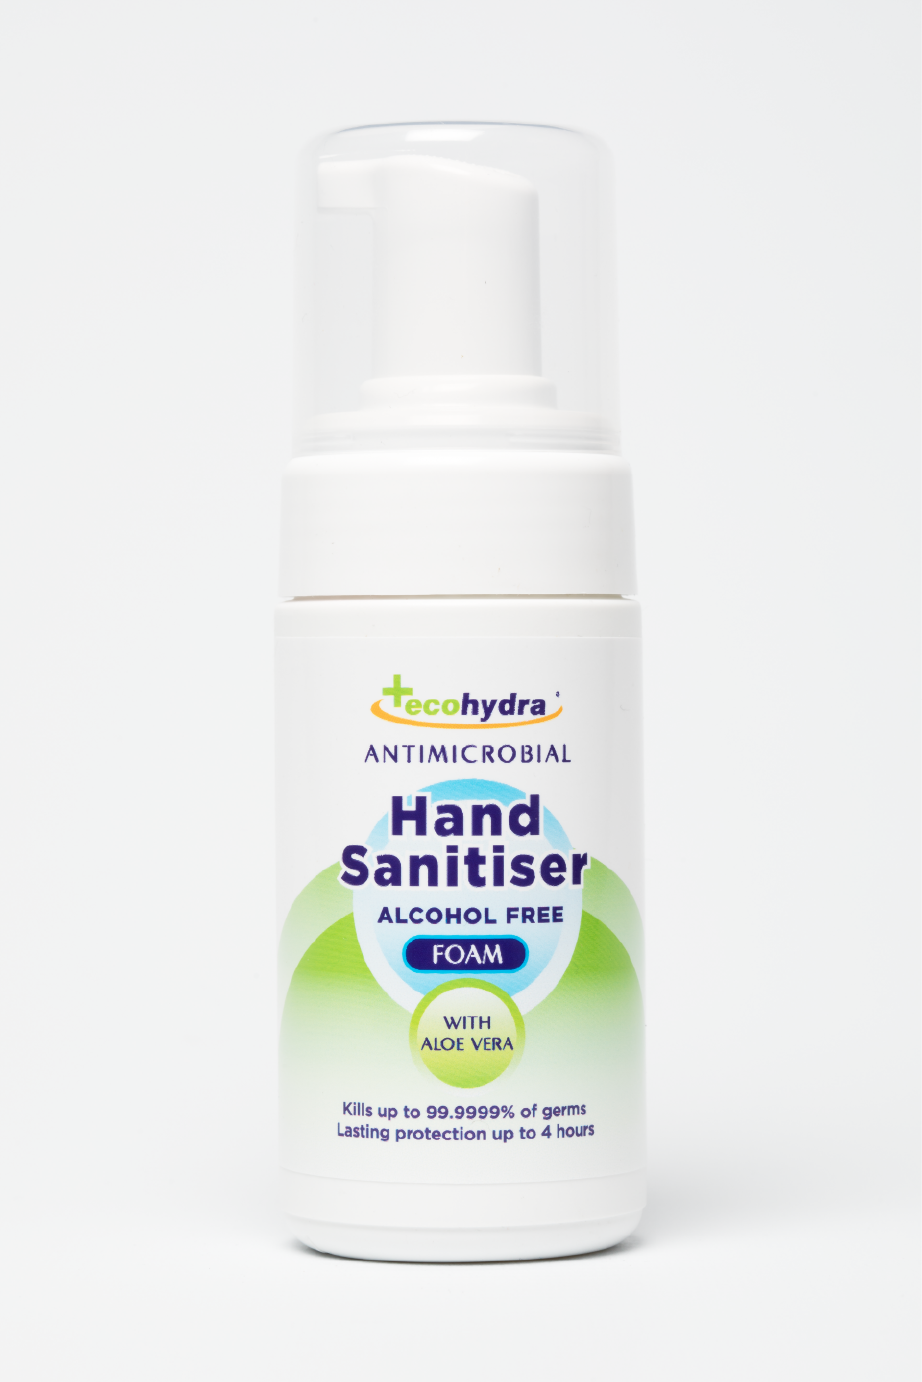 Antimicrobial Products, Foaming hand sanitizer